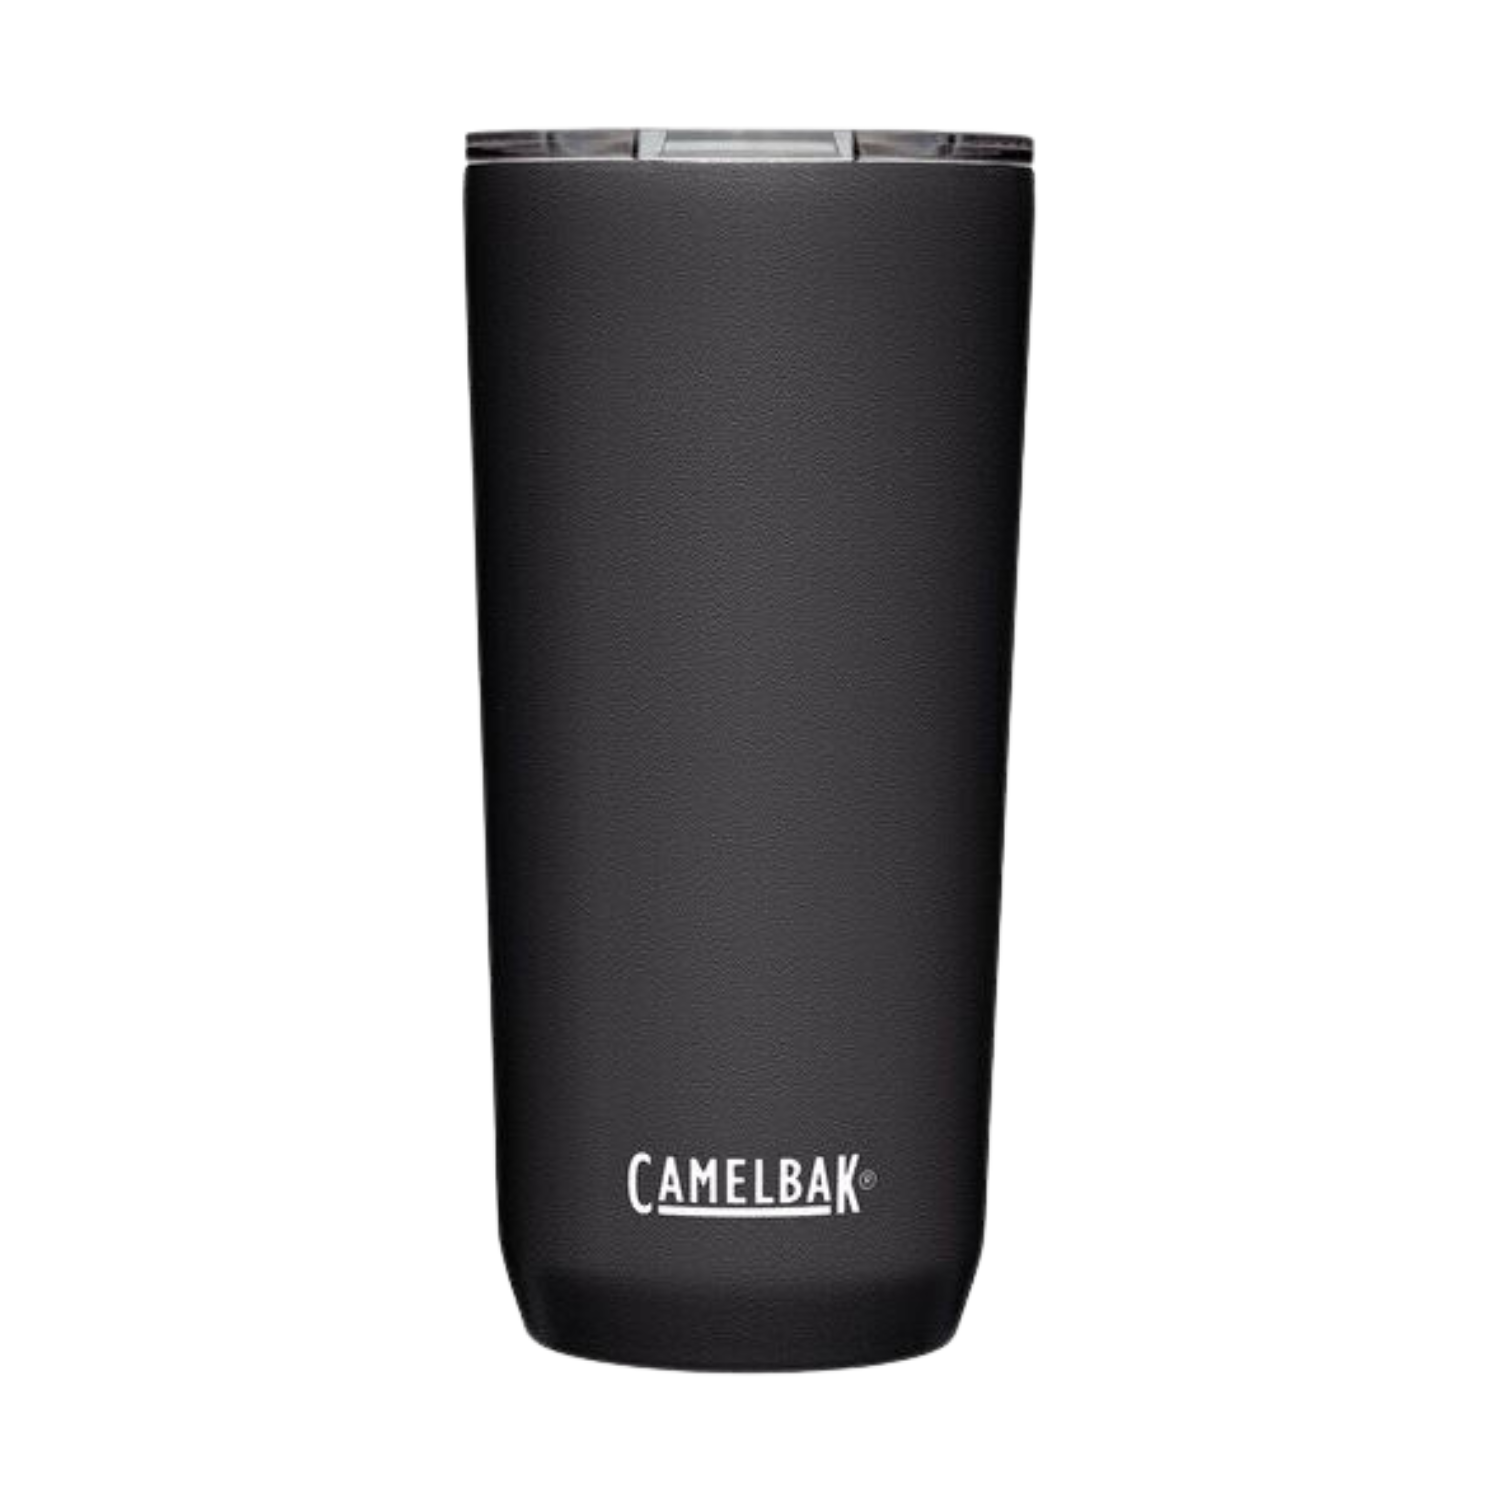 Camelbak Carry Cap Stainless Steel Vacuum Insulated 64oz Water